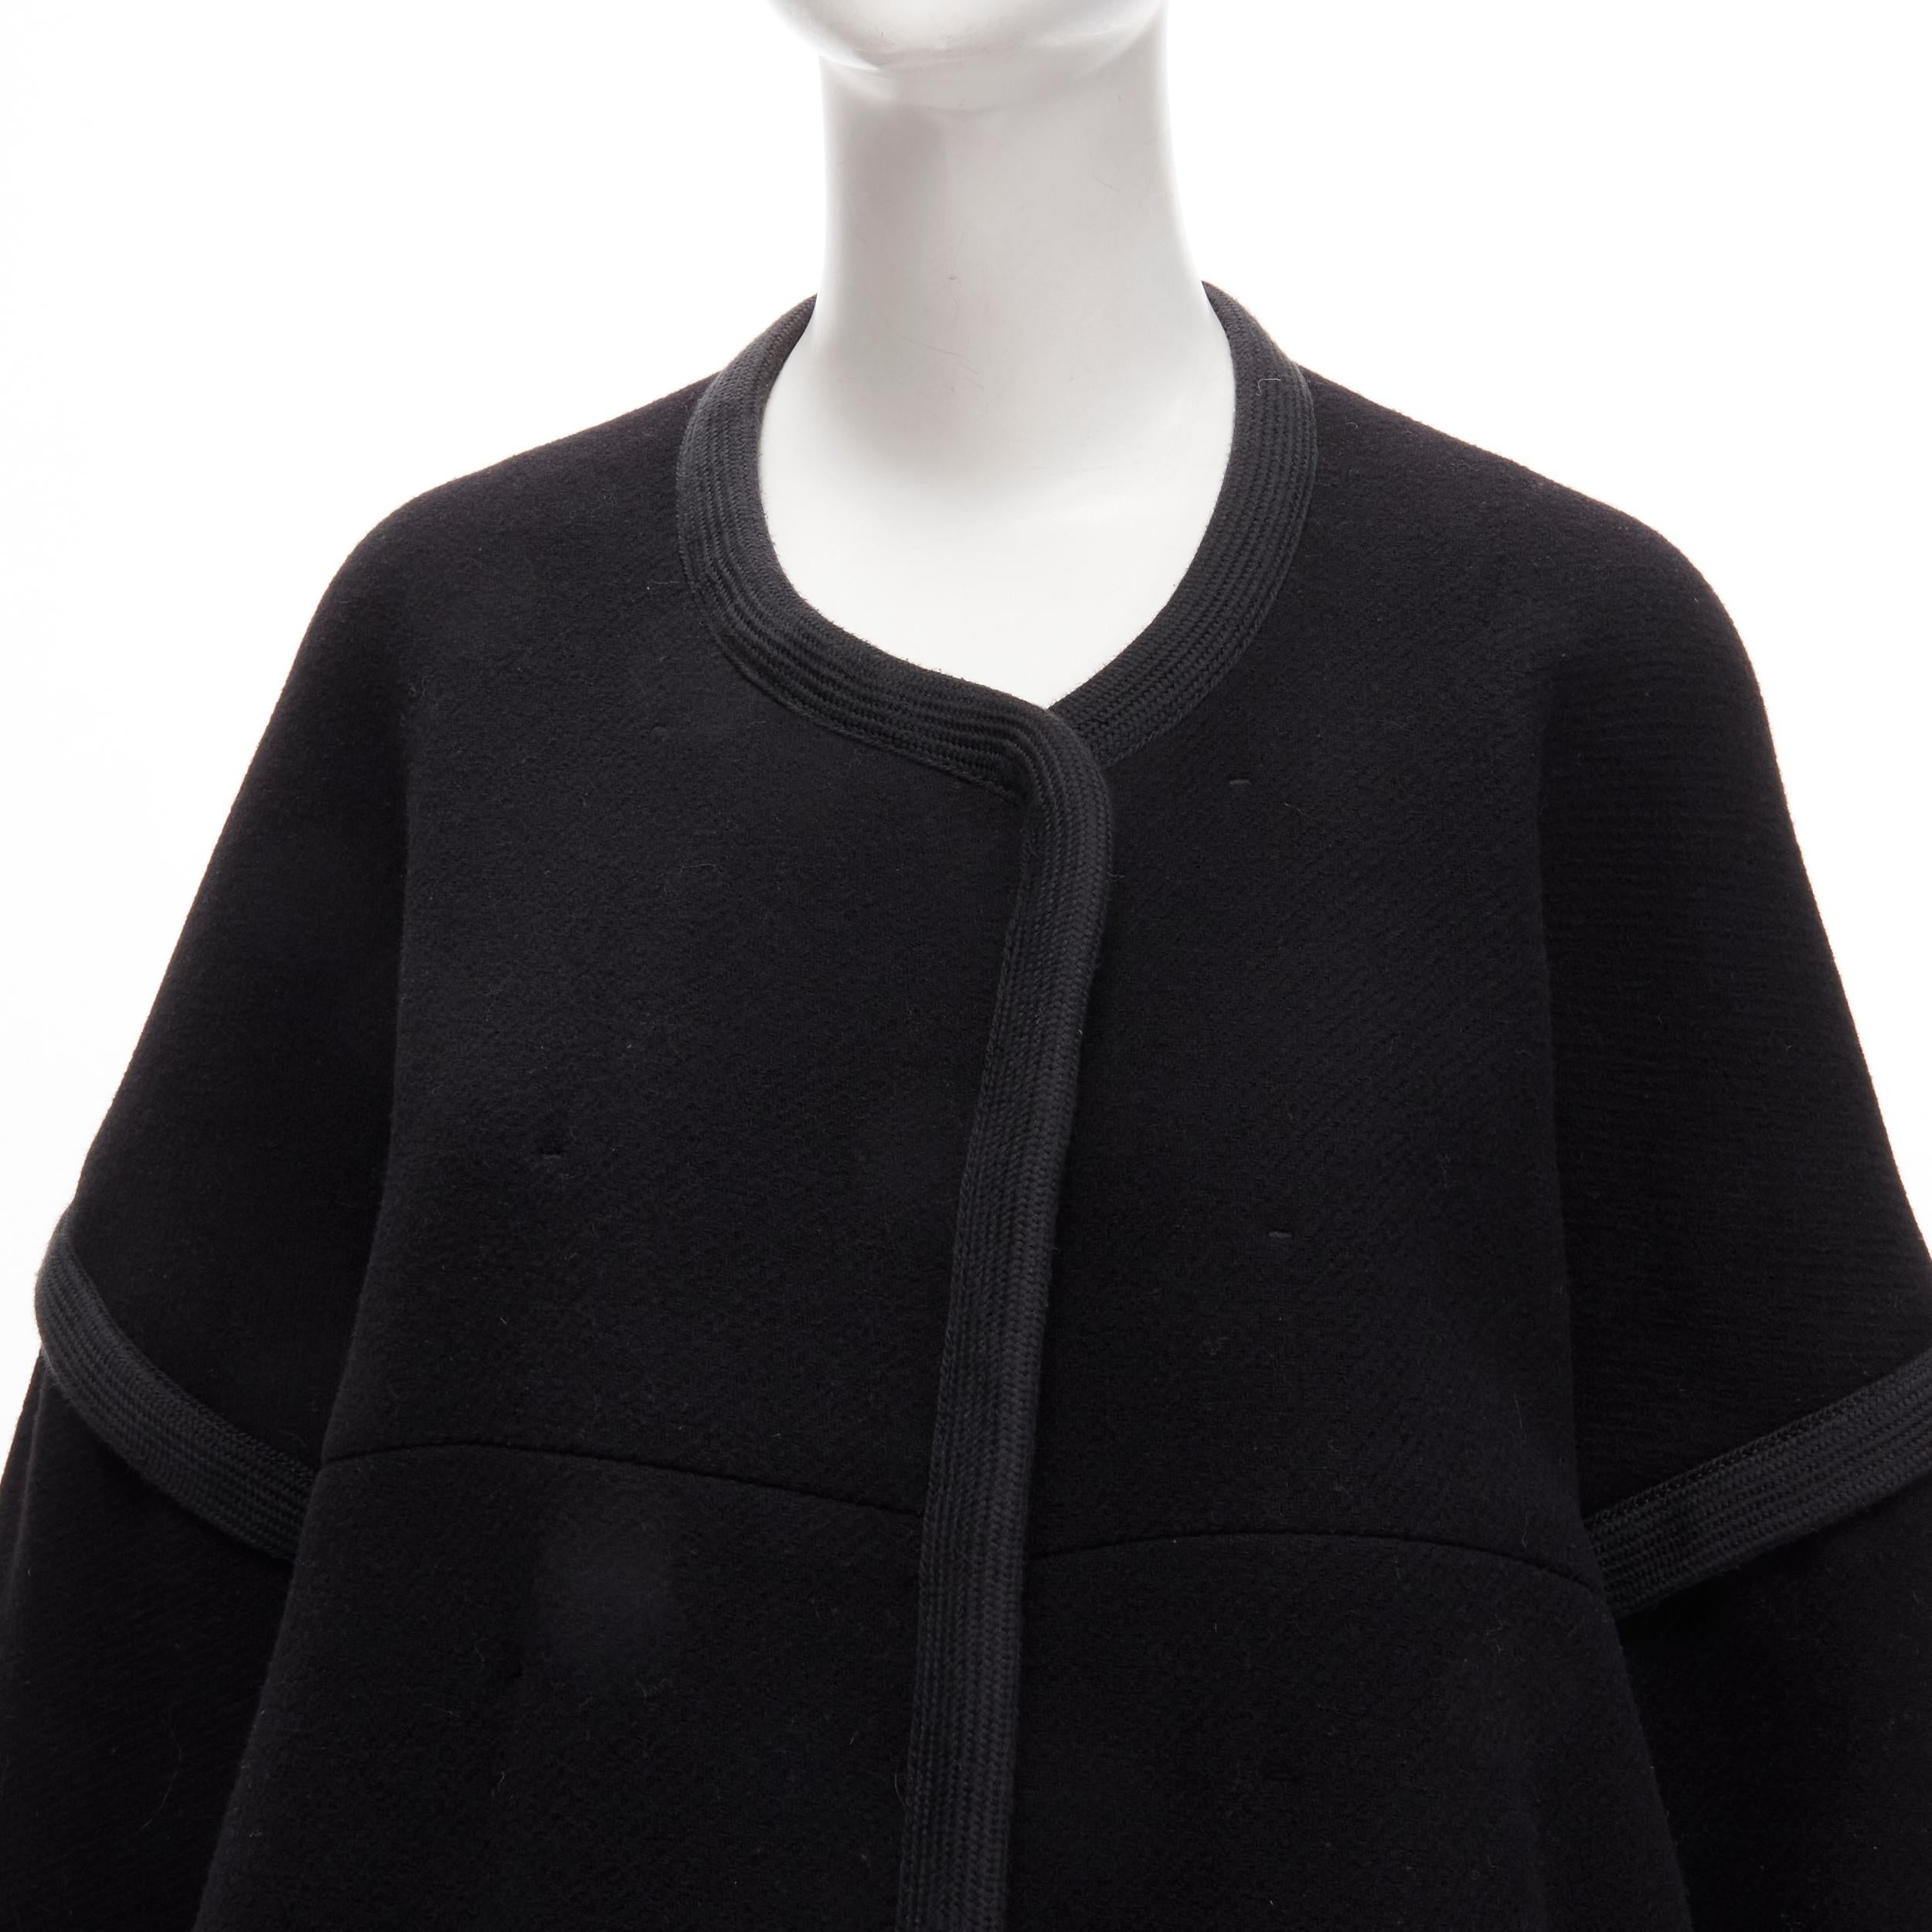 CHLOE virgin wool blend black cotton trim wide sleeve boxy cocoon coat FR34 XS
Reference: TGAS/C01685
Brand: Chloe
Material: Virgin Wool, Polyamide
Color: Black
Pattern: Solid
Closure: Snap Buttons
Lining: Black Fabric
Made in: